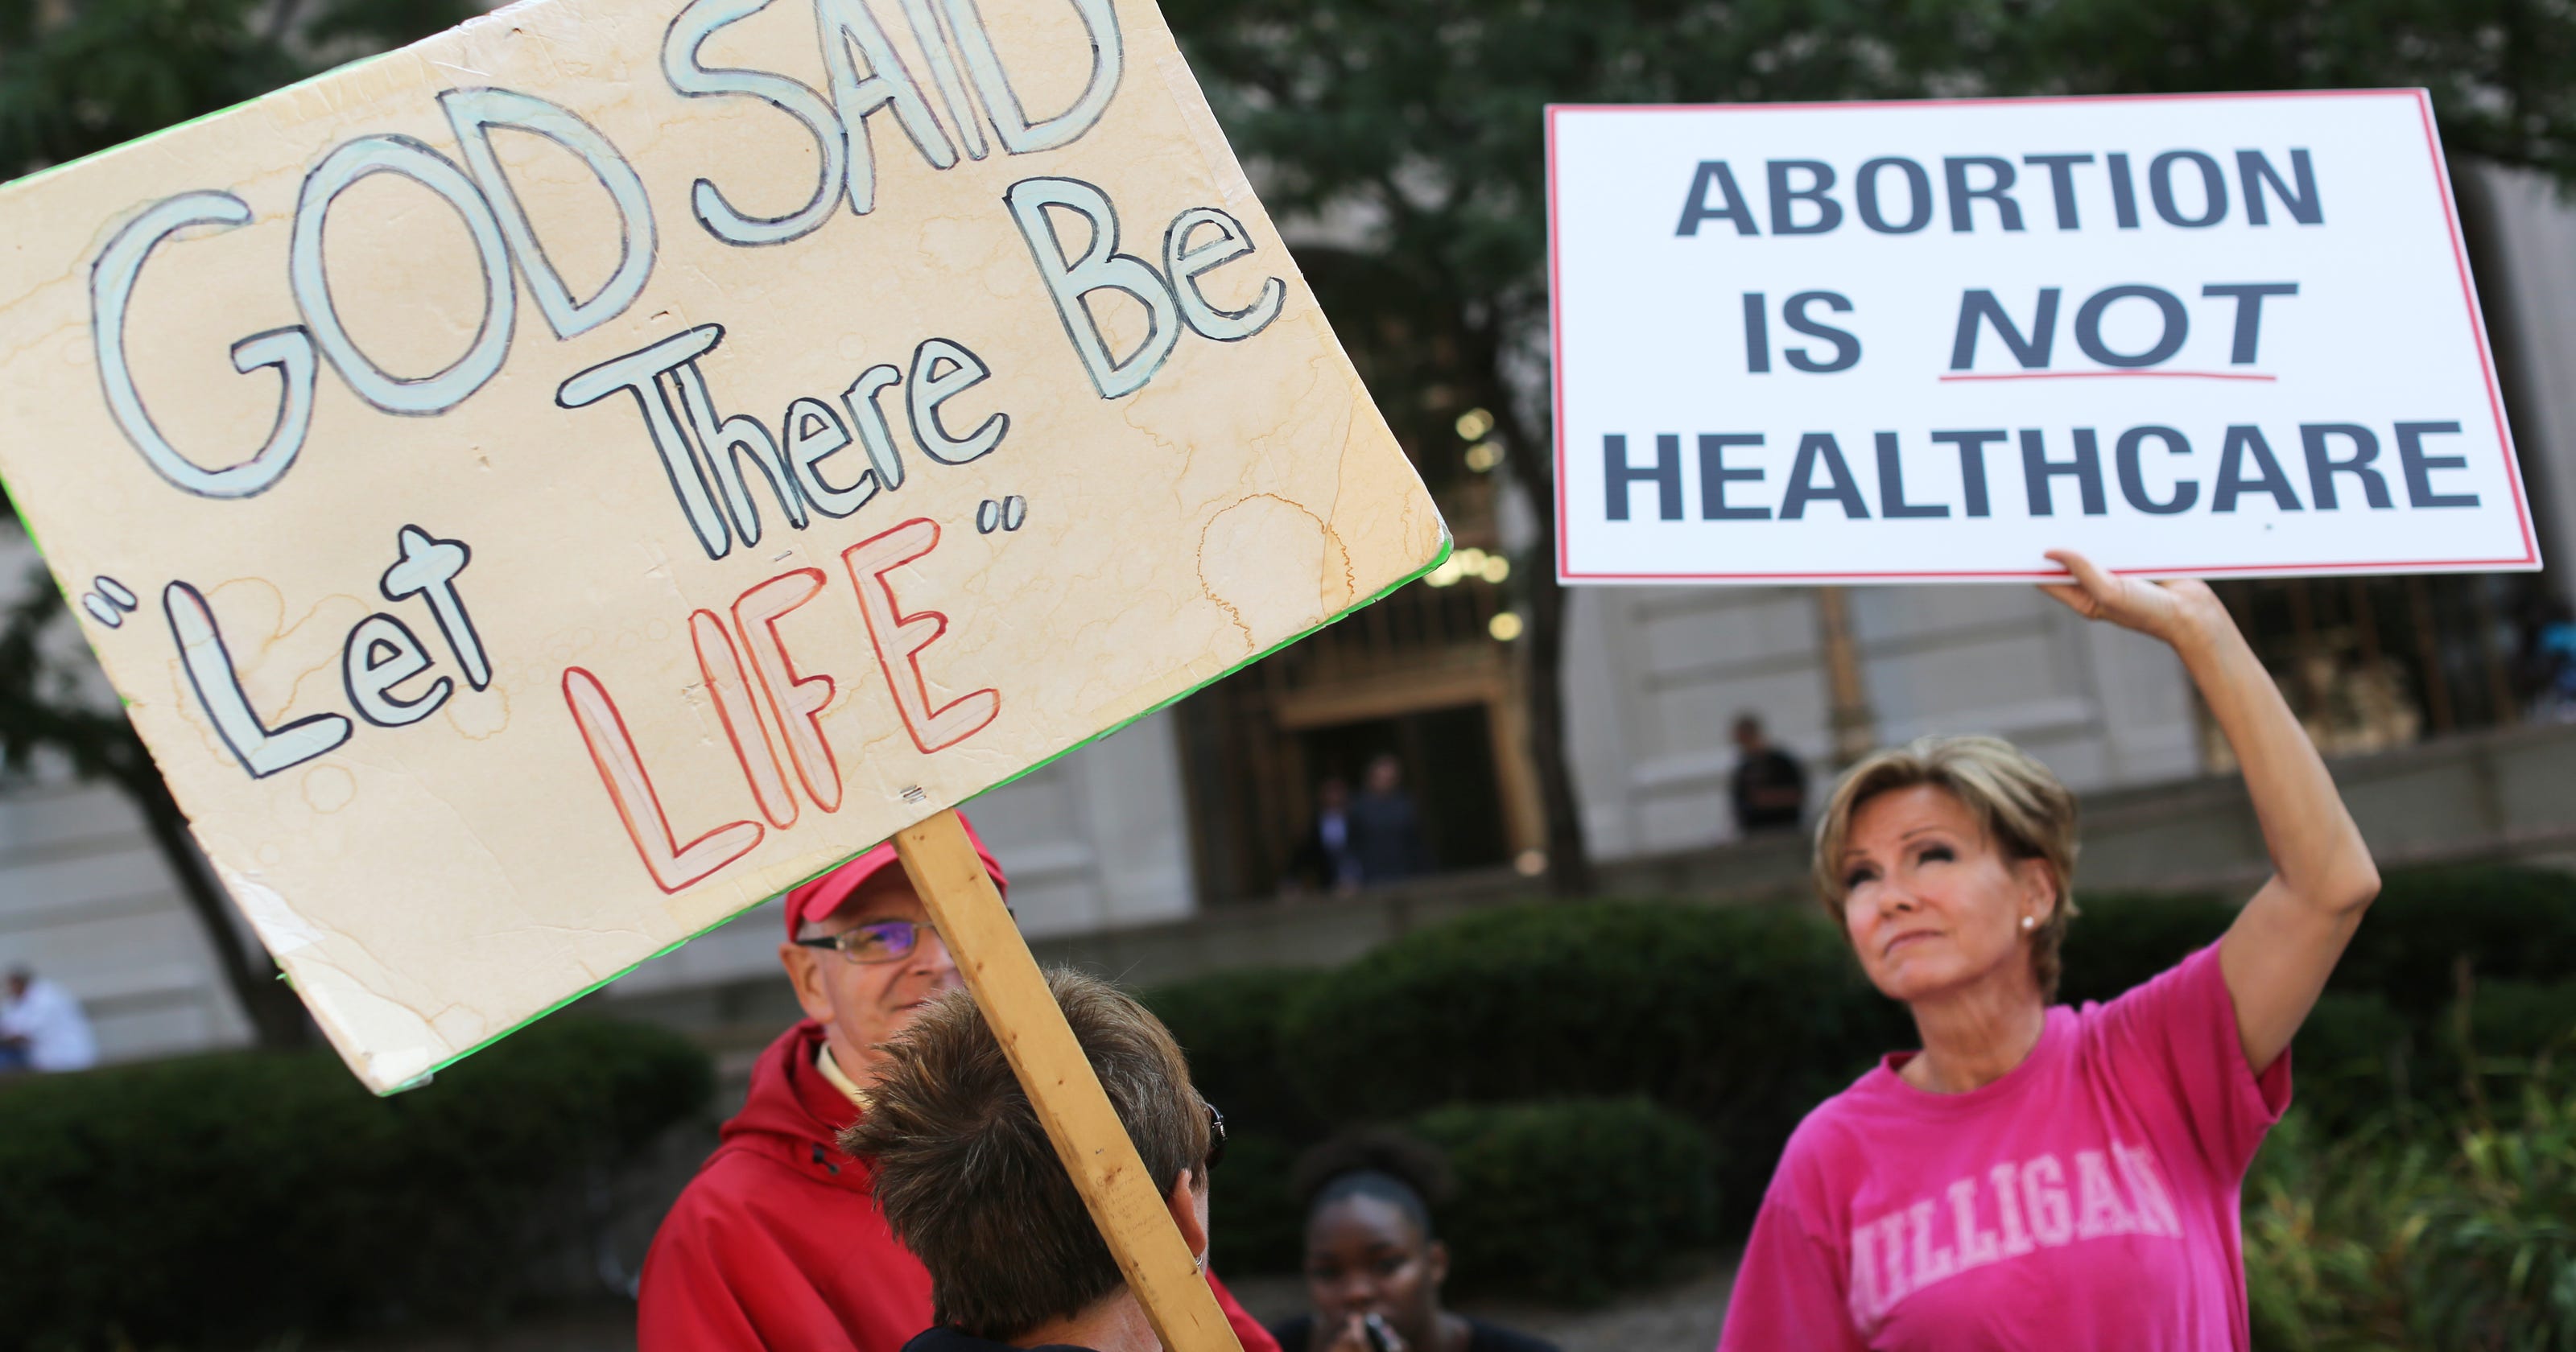 Ohio clinic halts abortions, quits court fight